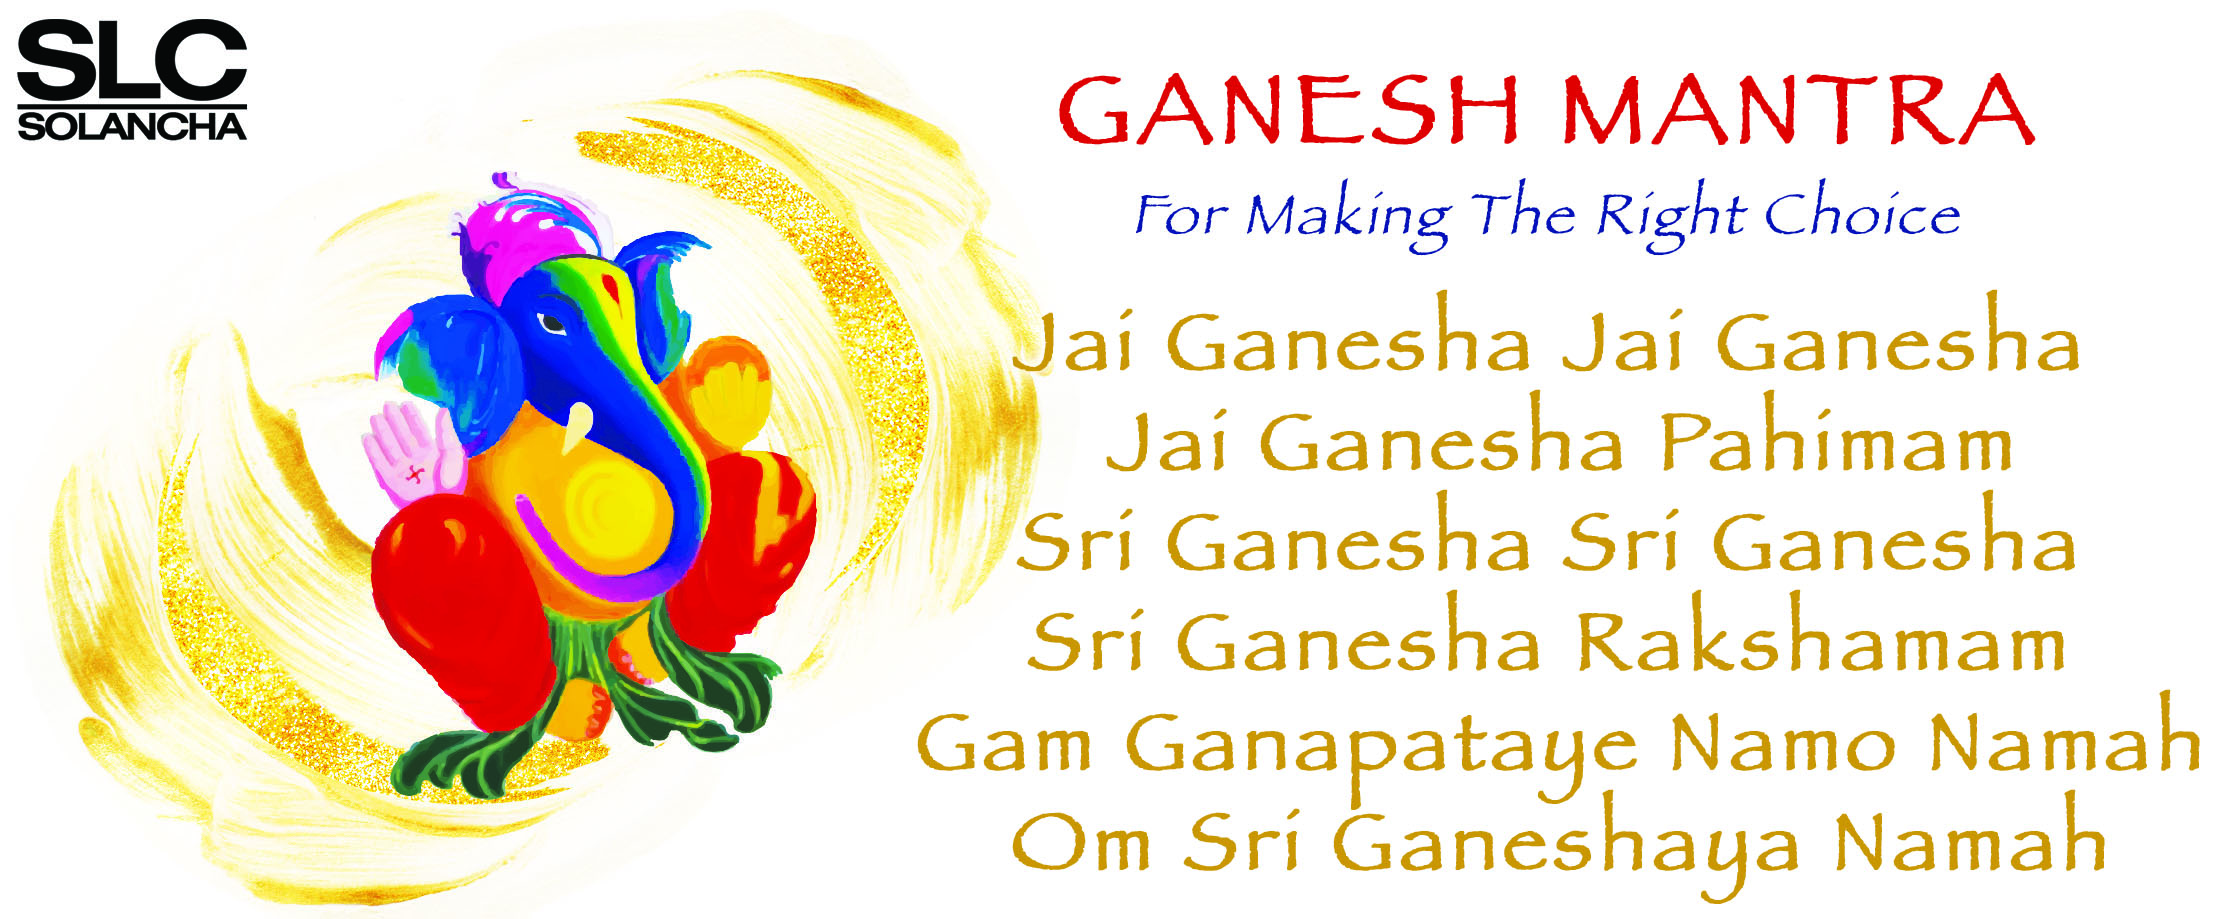 Ganesh mantra for making the right choice image